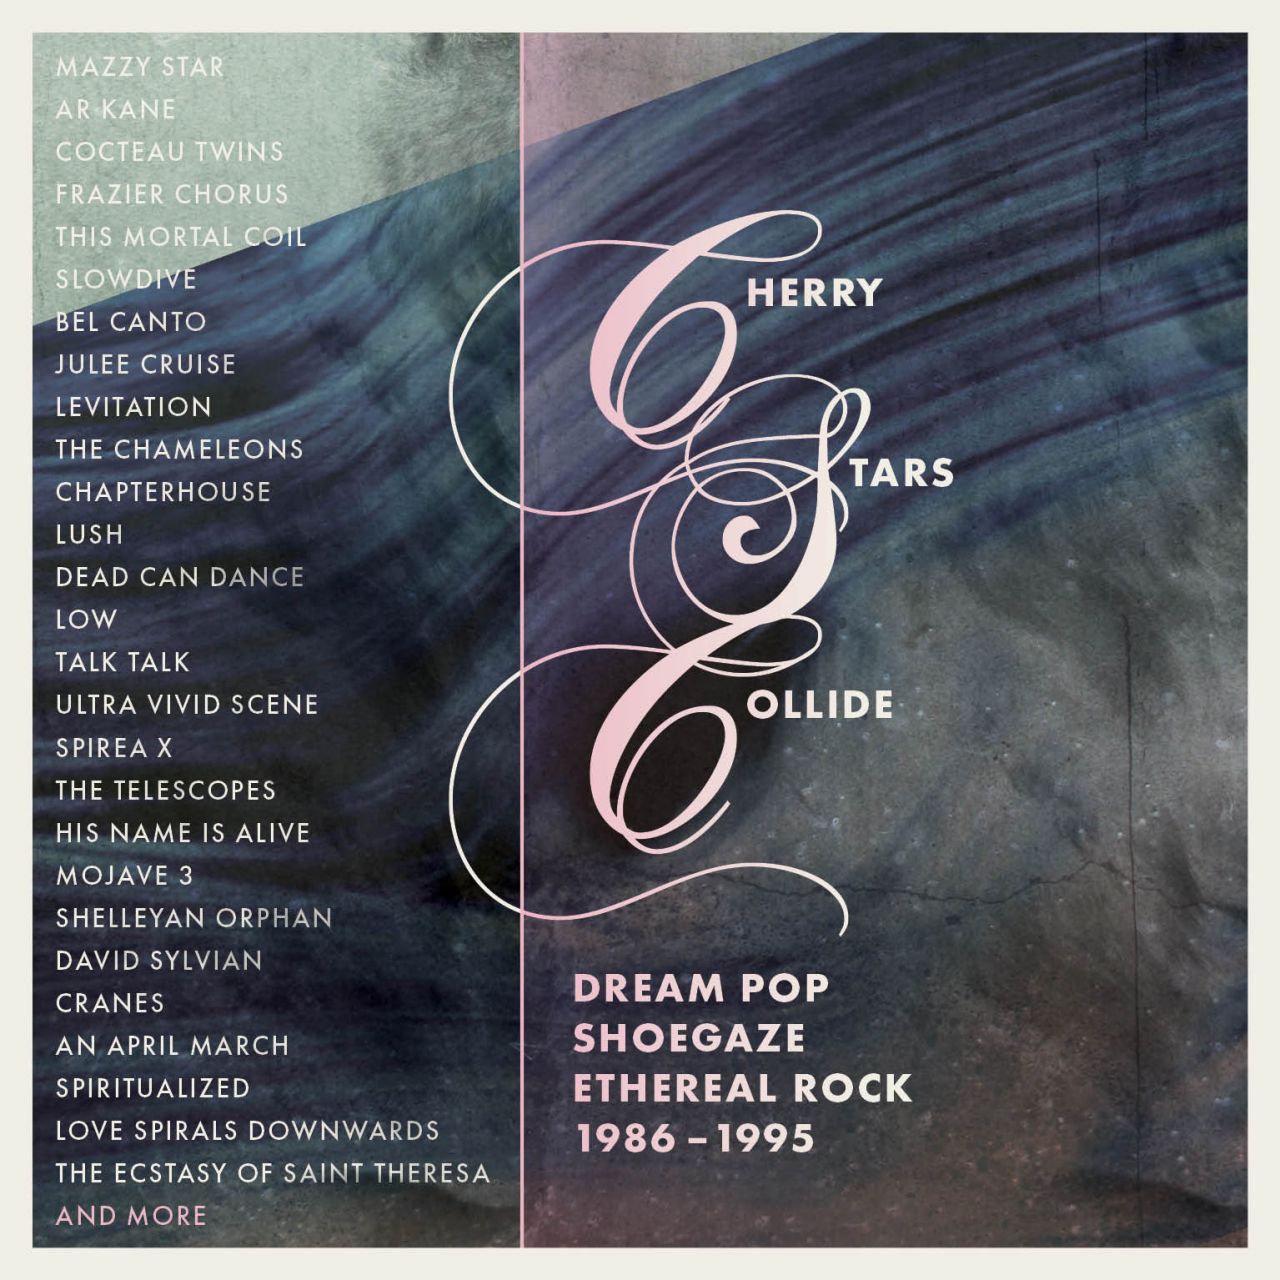 Various Artists - Cherry Stars Collide: Dream Pop, Shoegaze and Ethereal Rock 1986-1995 - 4CD